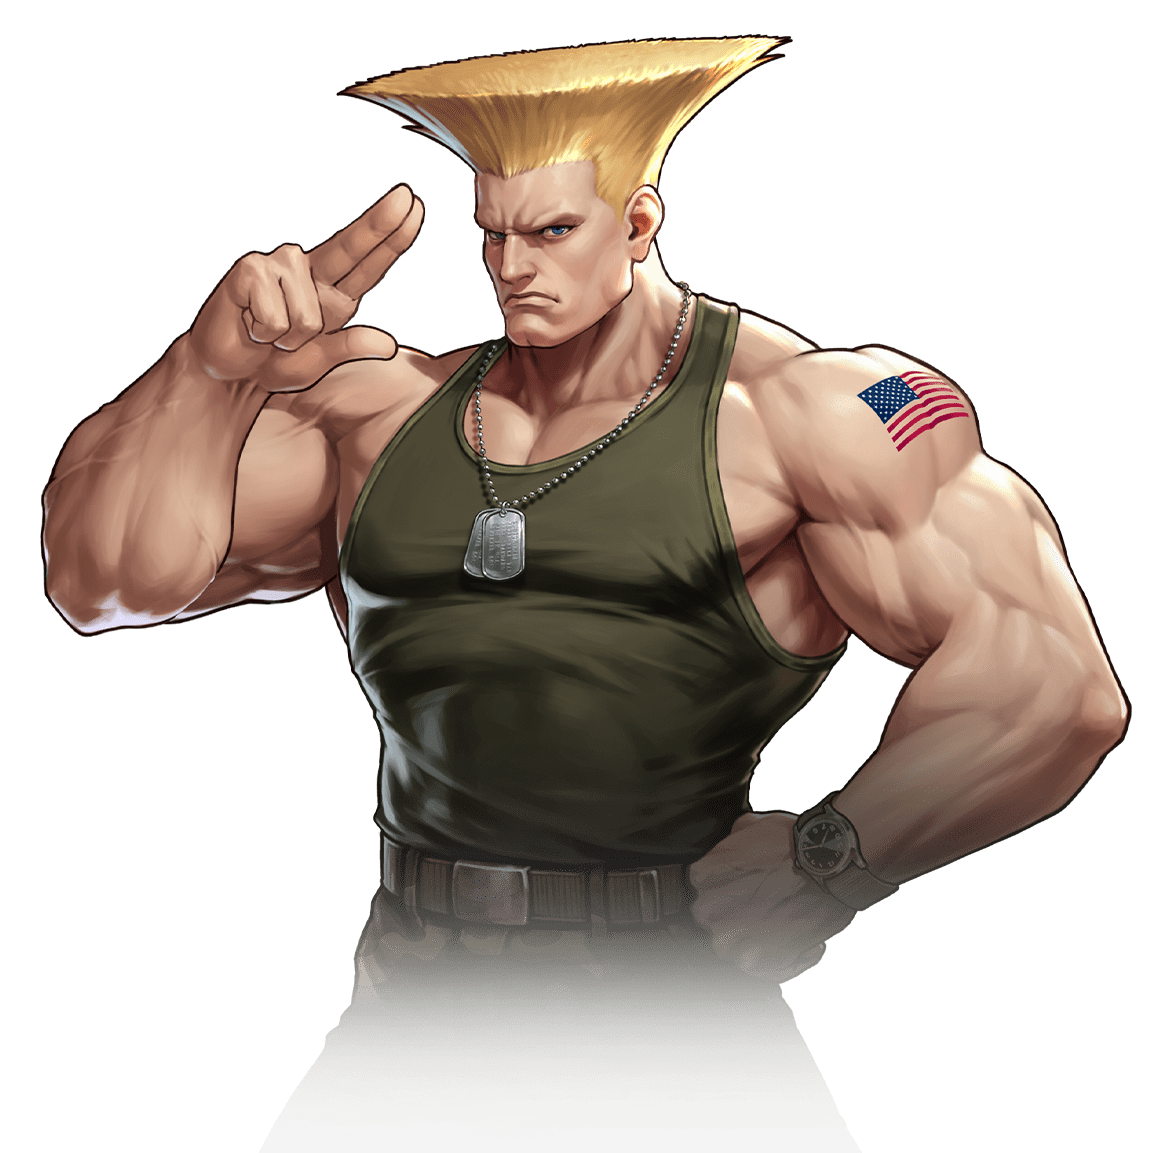 X-Guile A-Guile X-ism A-ism Verifiable Super Combos - Street Fighter Alpha  3 SFA3 Upper/Max 